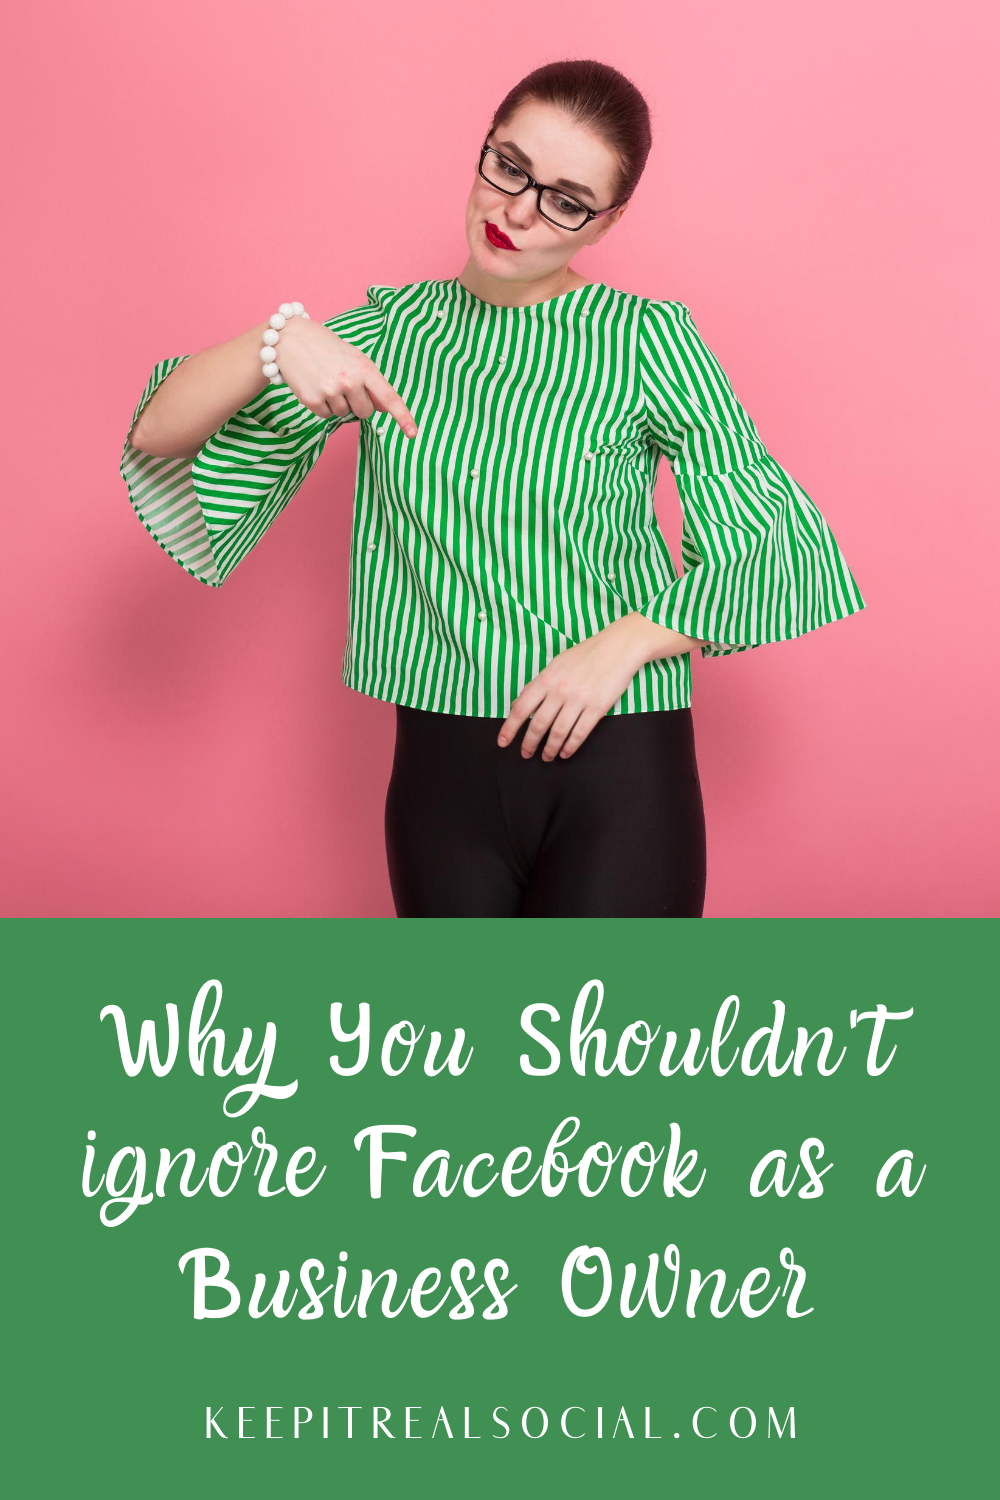 Why You Shouldn't ignore Facebook as a Business Owner Keep it Real Social a Social Media Marketing Company in Northern Michigan